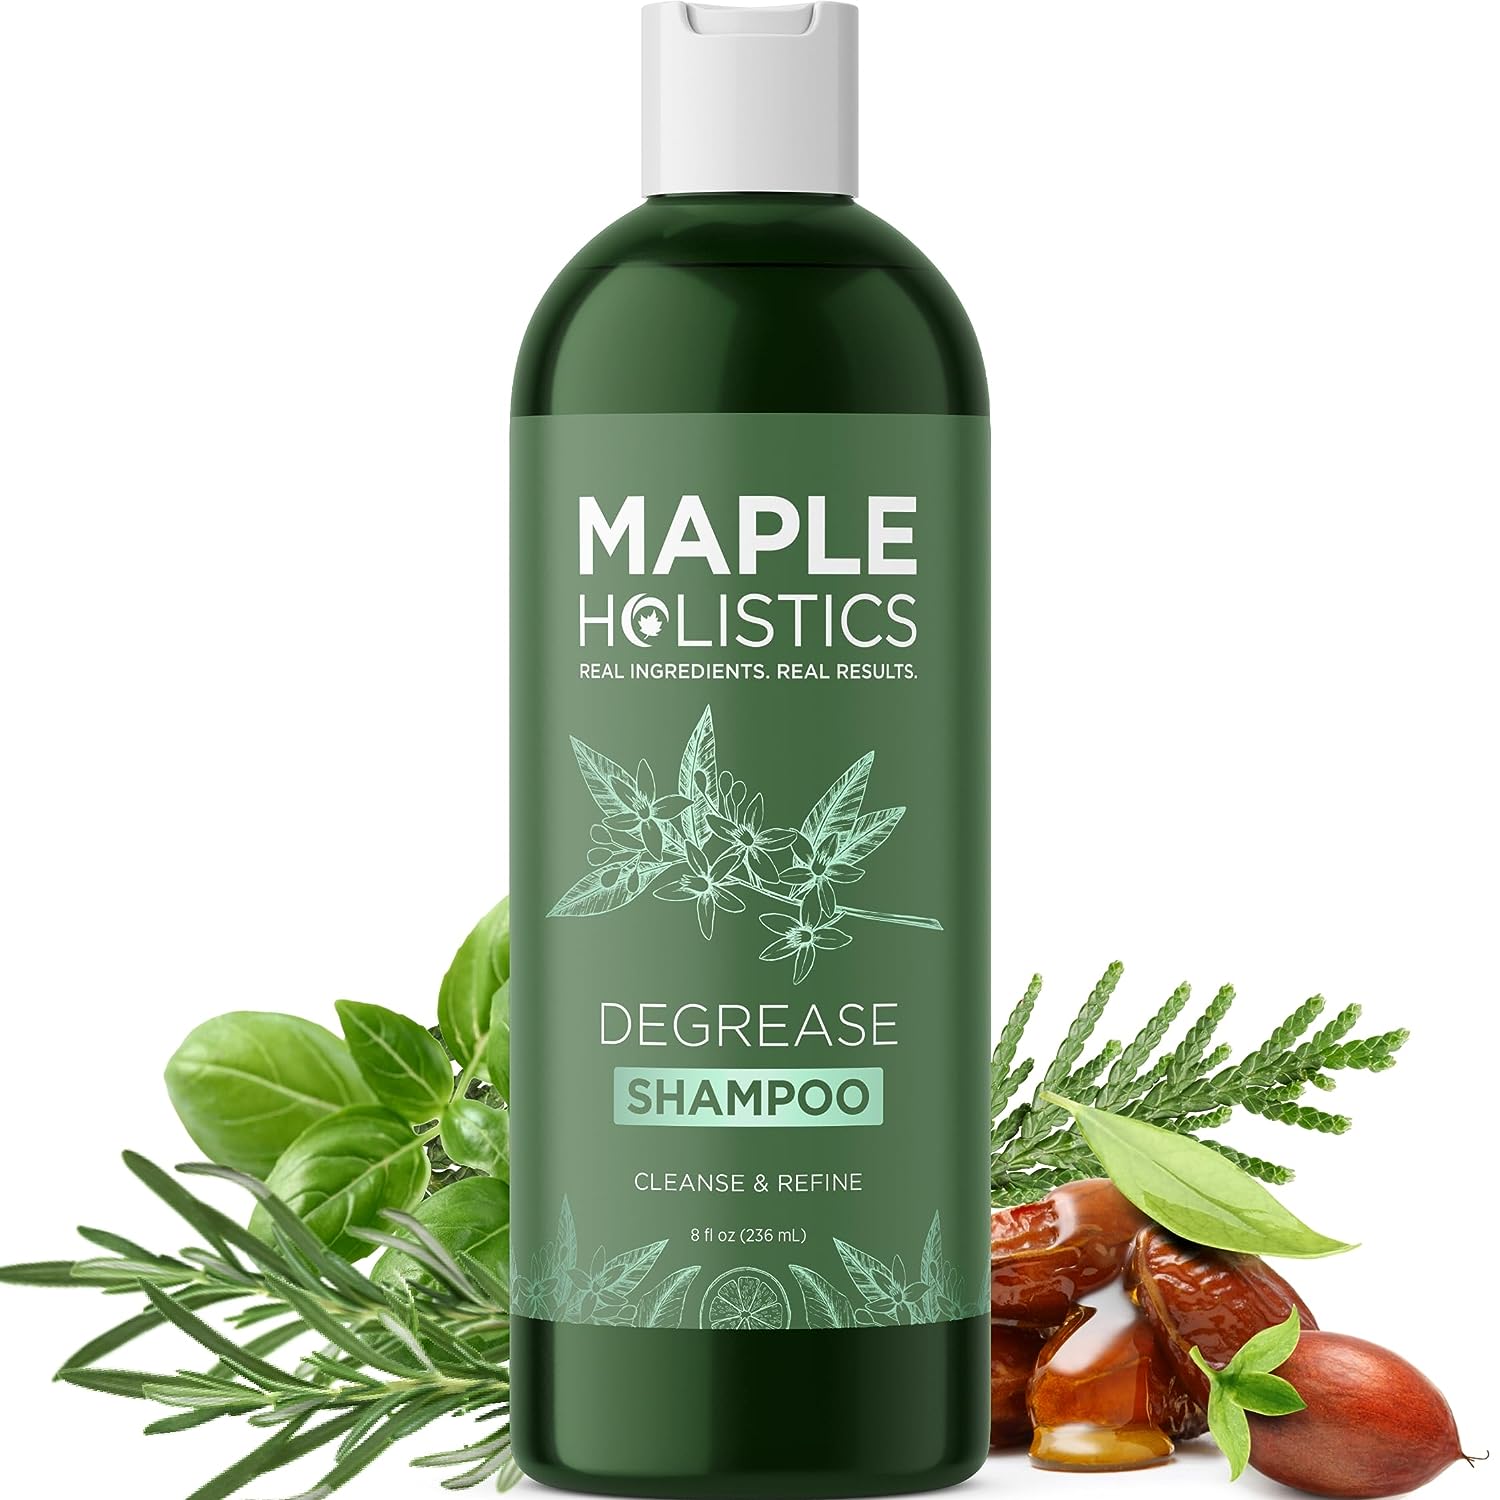 Degrease Shampoo for Oily Hair Care - Clarifying [...]